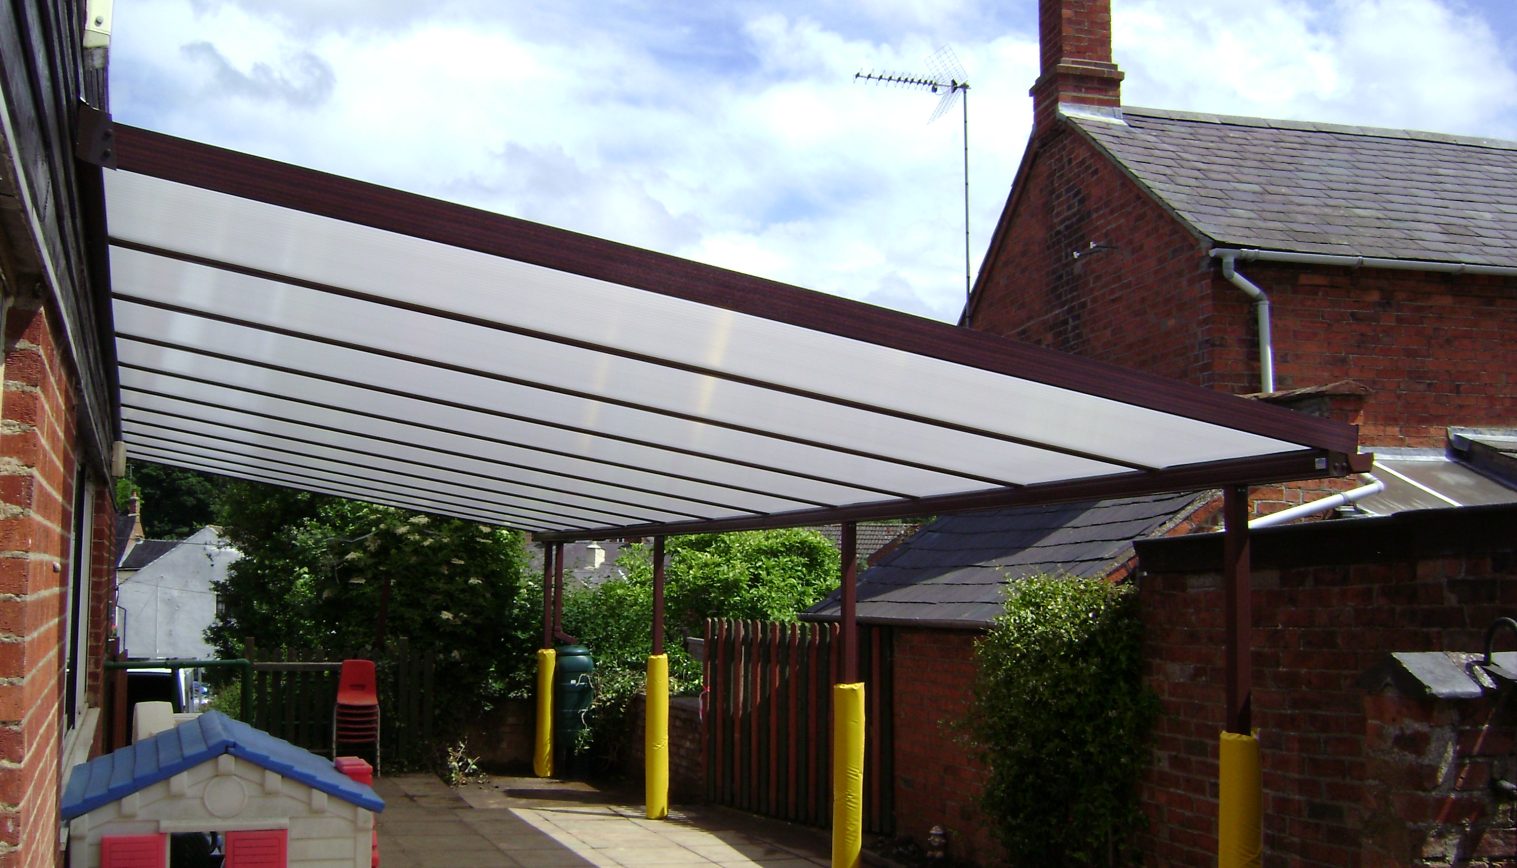 West Haddon Primary School – Wall Mounted Canopy